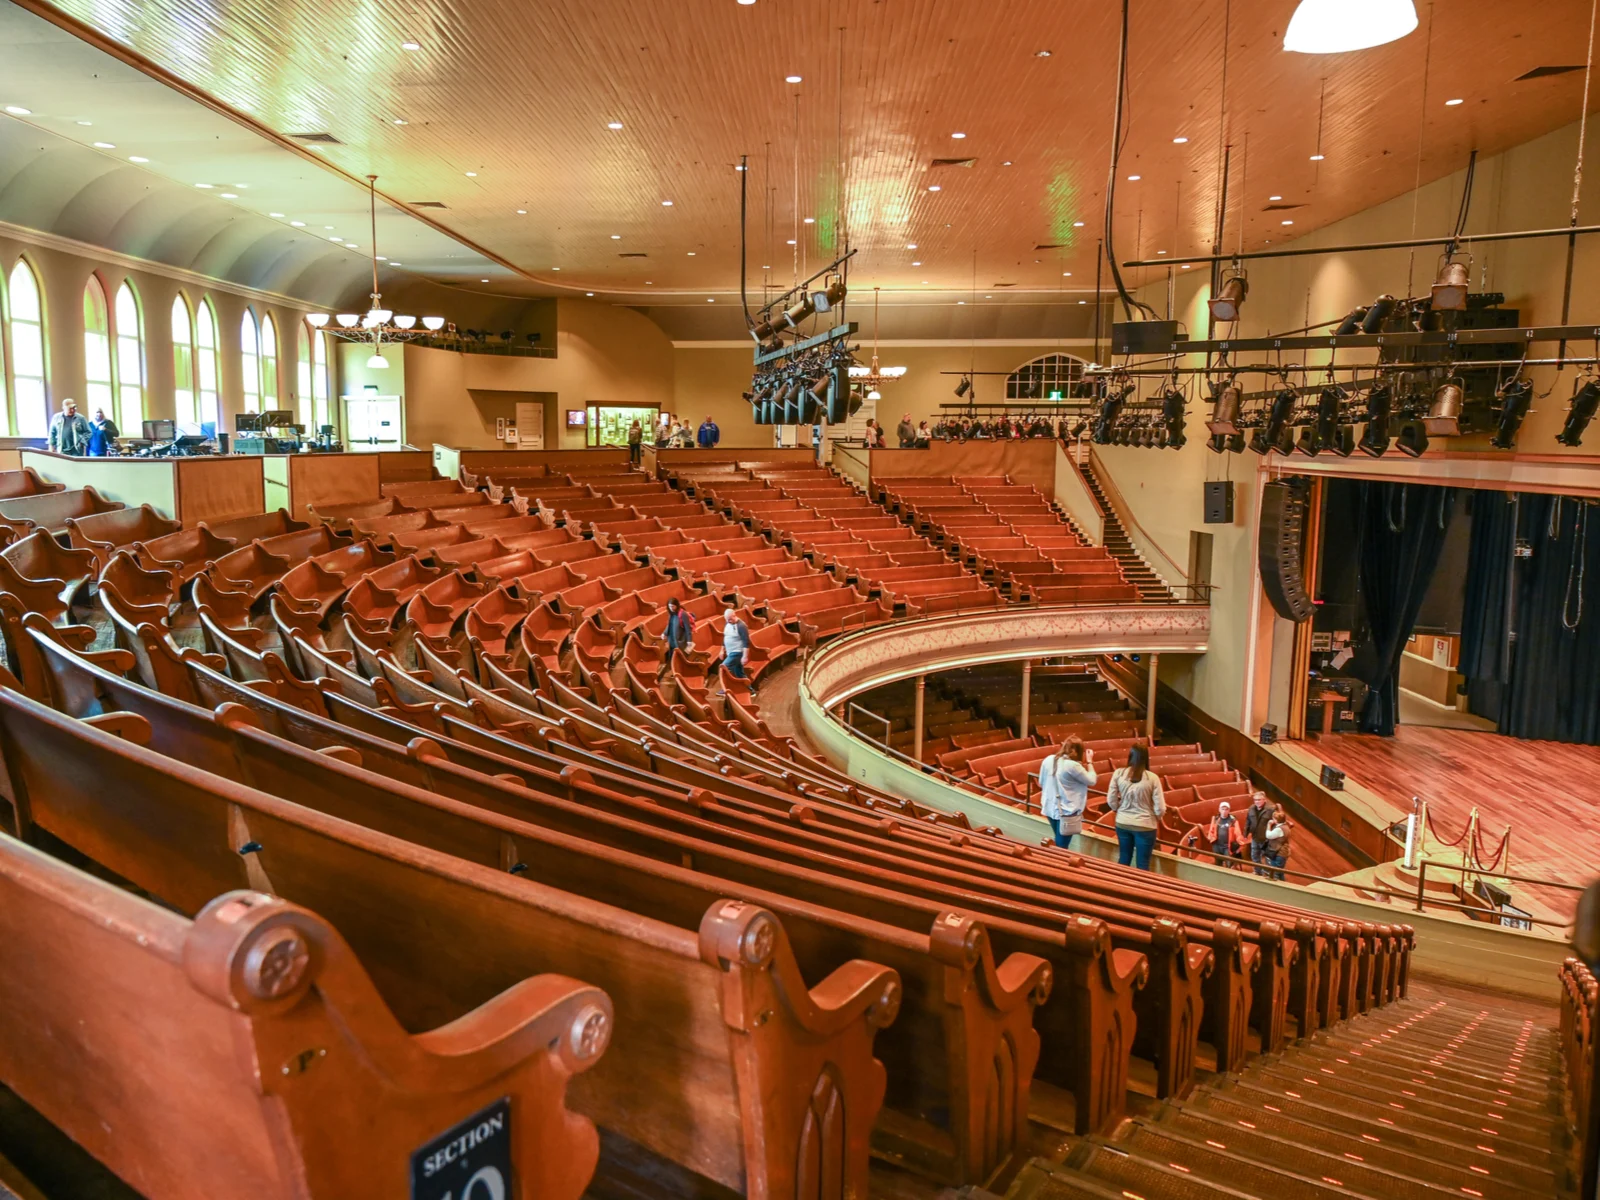 Spacious interior of the well known Ryman Auditorium consisting rows of long wooden chairs and hanging spotlights, photographed from the upper section as a piece on one of the best things to do in Tennessee